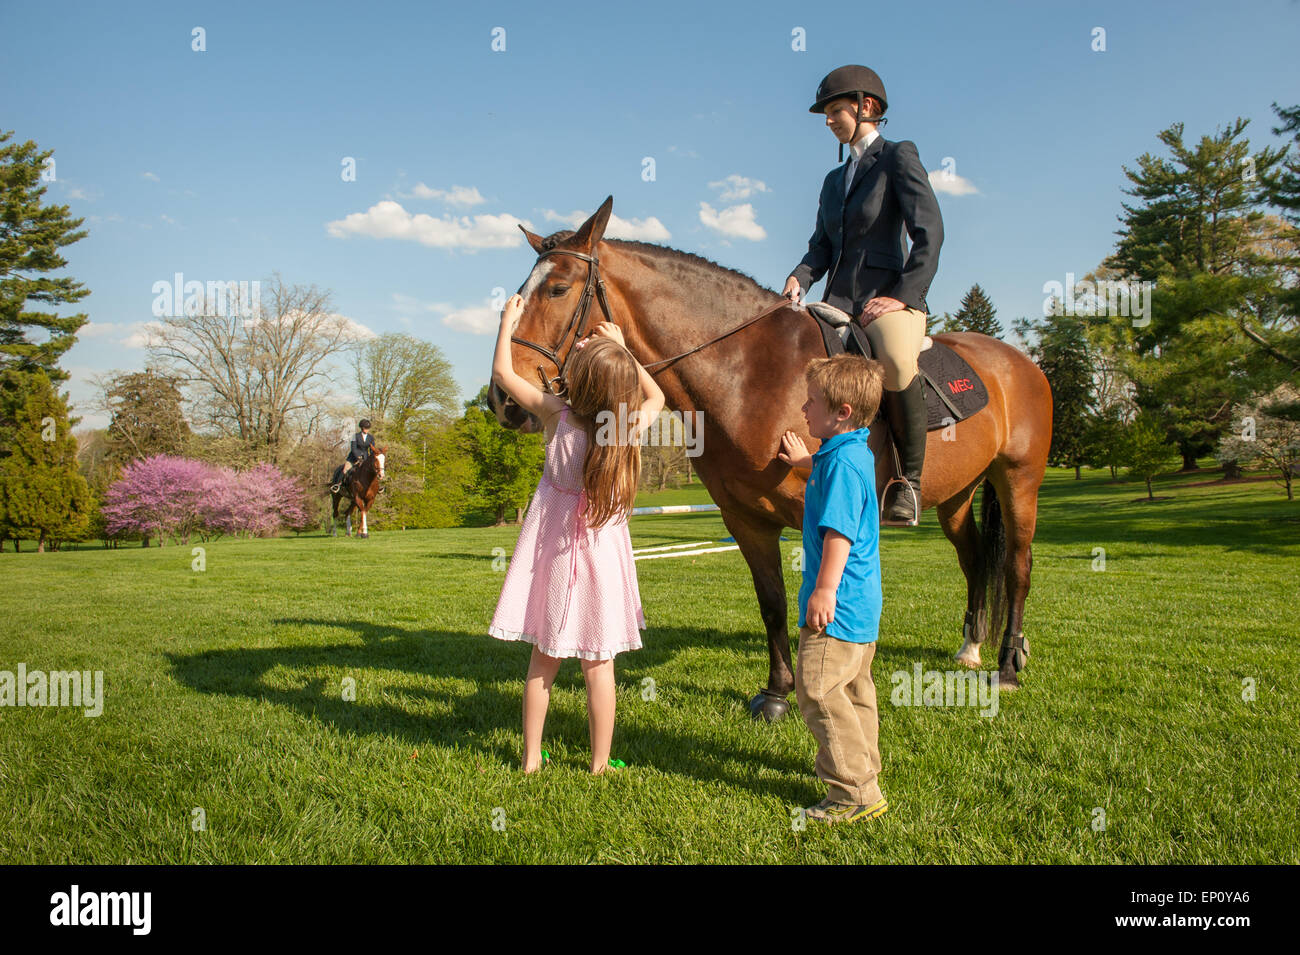 Woman sitting on a horse while a girl and a boy pet the horse in Baltimore County, MD USA Stock Photo